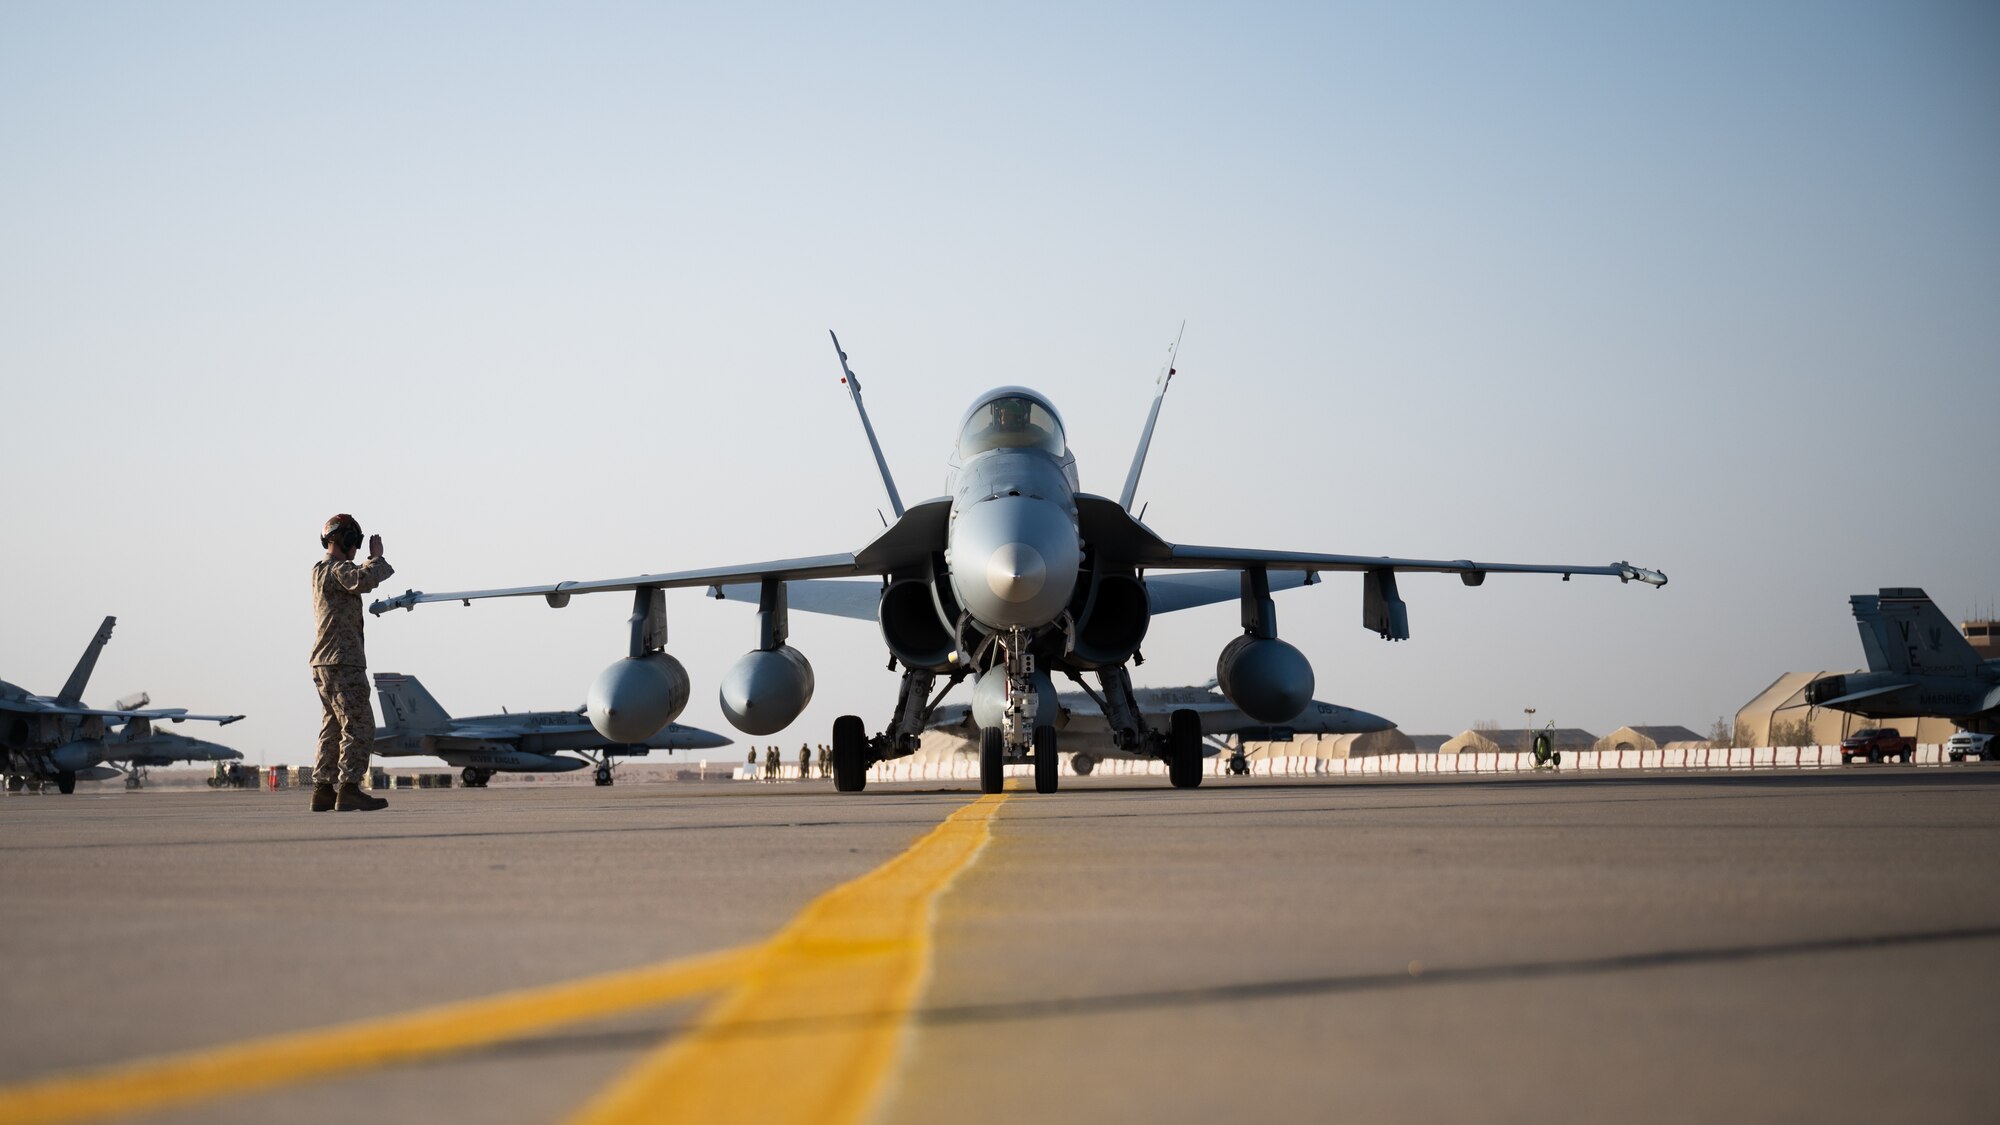 A U.S. Marine F/A-18 Hornet taxis on the flight line at Prince Sultan Air Base, Kingdom of Saudi Arabia, Dec. 23, 2021. The arrival of the Marine Fighter Attack Squadron 115 is a key addition to PSAB as it prepares and postures U.S. and coalition forces to span the full range of combat effectiveness. (U.S. Air Force photo by Senior Airman Jacob B. Wrightsman)